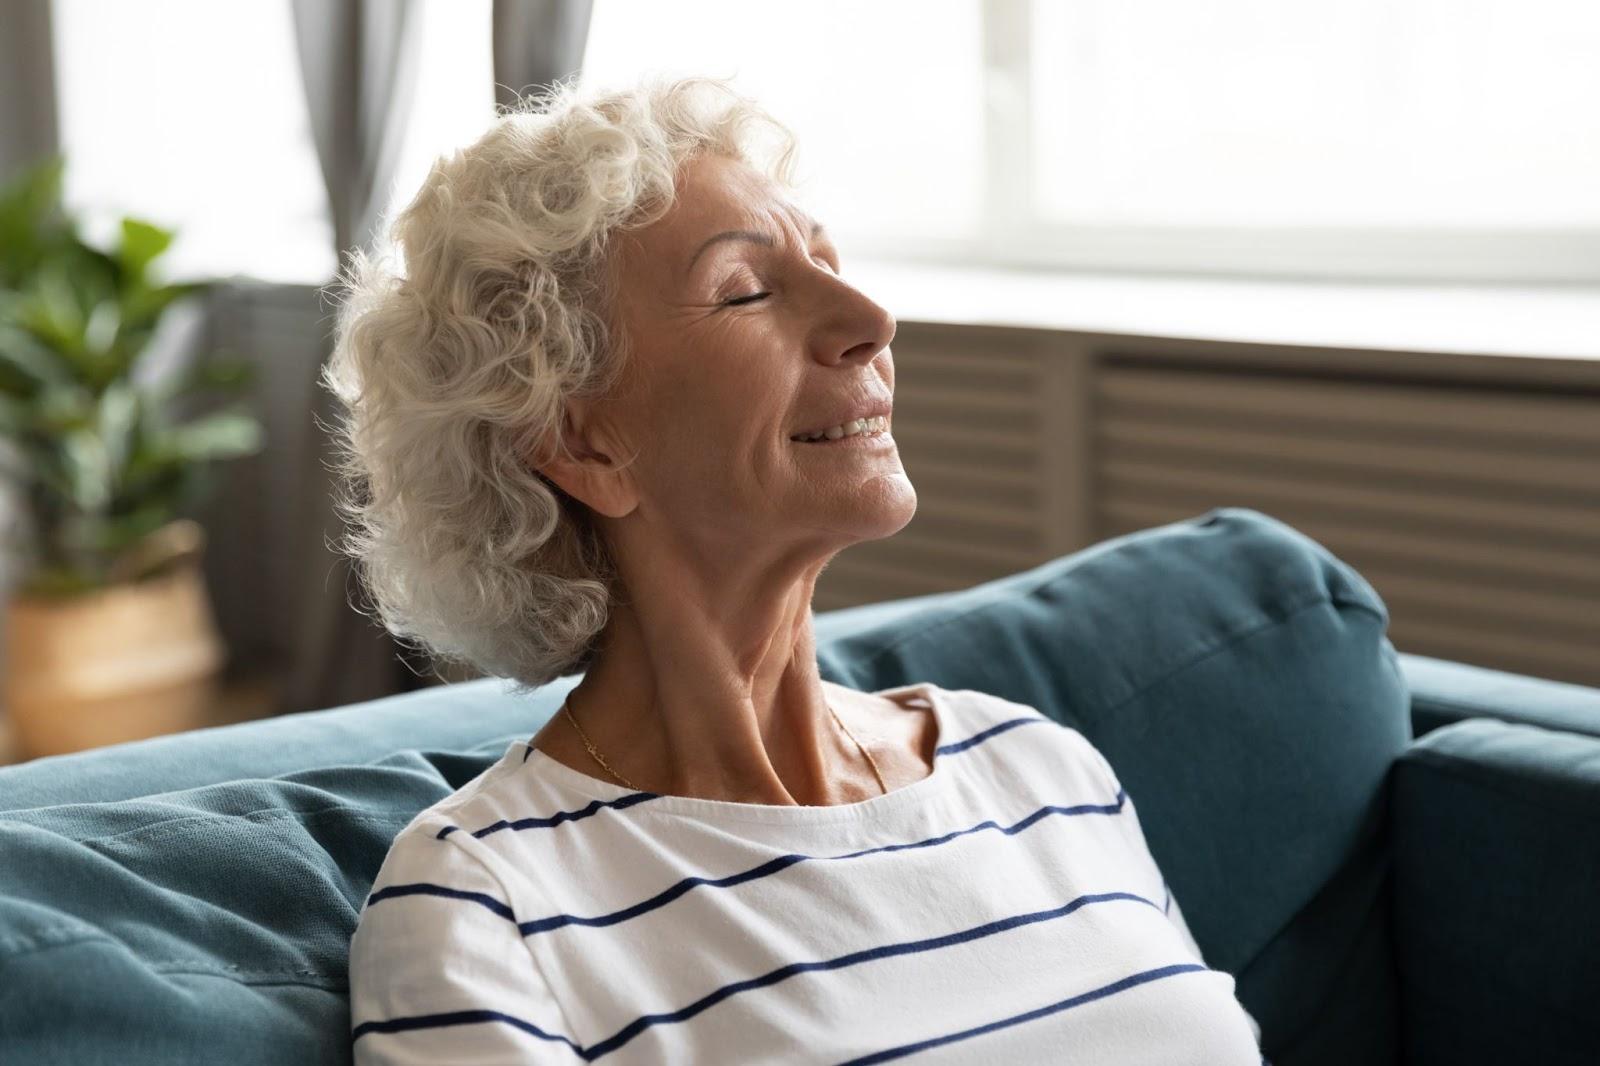 5 Ways to Find Fulfillment in Aging